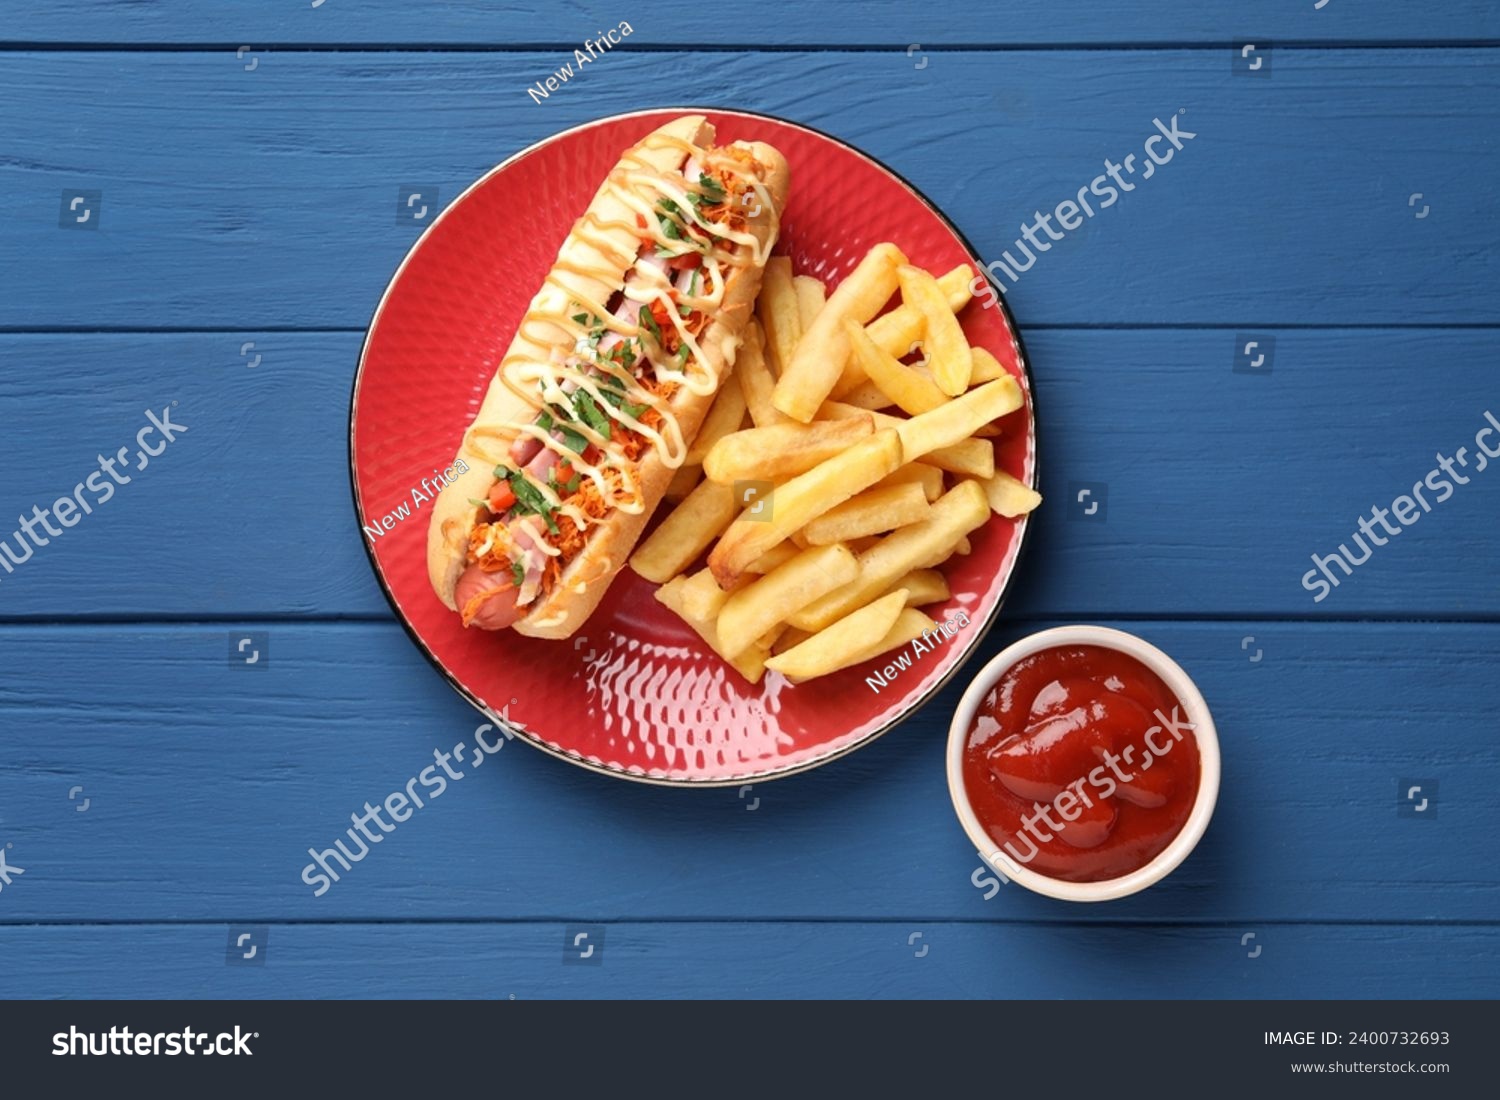 Delicious hot dog with bacon, carrot and parsley served on blue wooden table, flat lay #2400732693